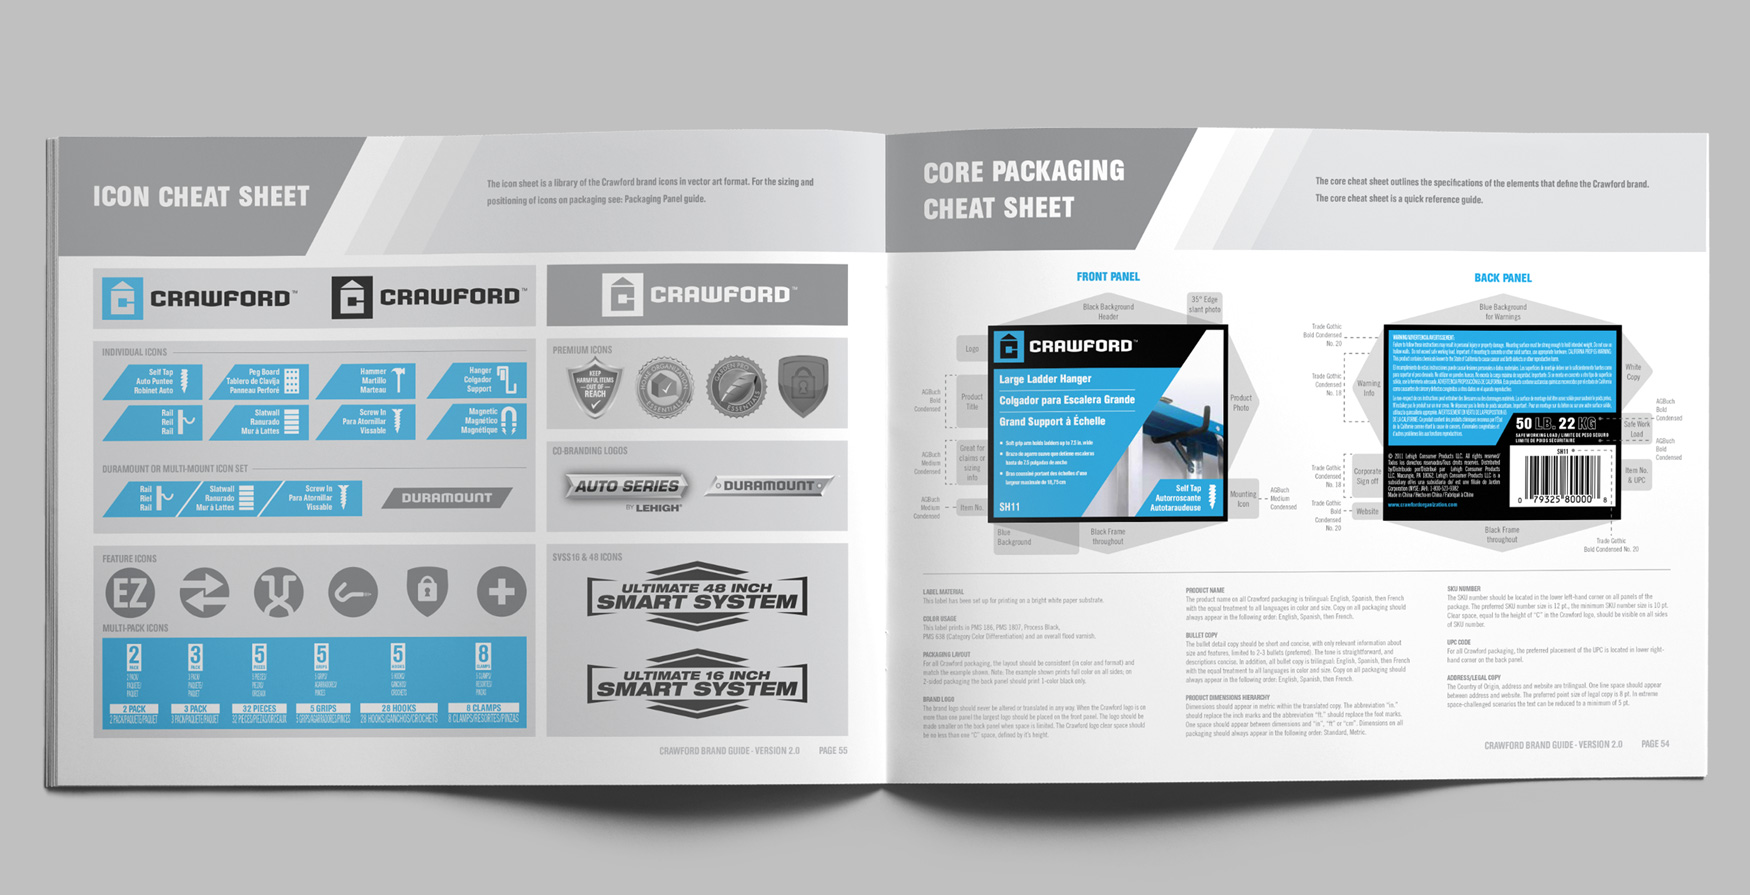 crawford-brand-guide-book-design-interior-page-layout-branding-clean-hardware-industrial-graphic-design-guidelines